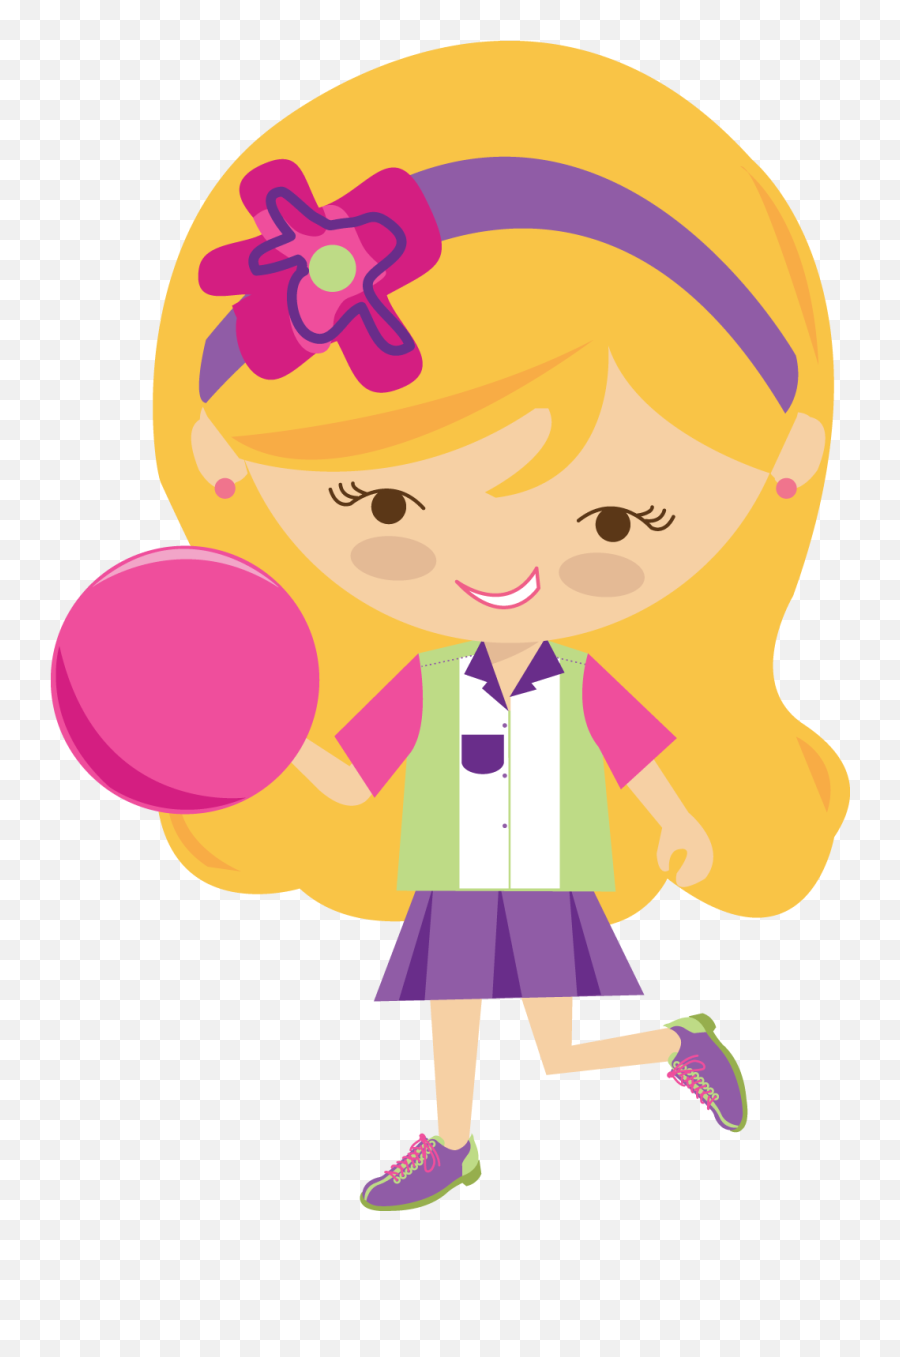 Download Png Image - Bowling Clipart Pink Girl Png Image Bowling Little Girl Clipart,Bowling Clipart Png